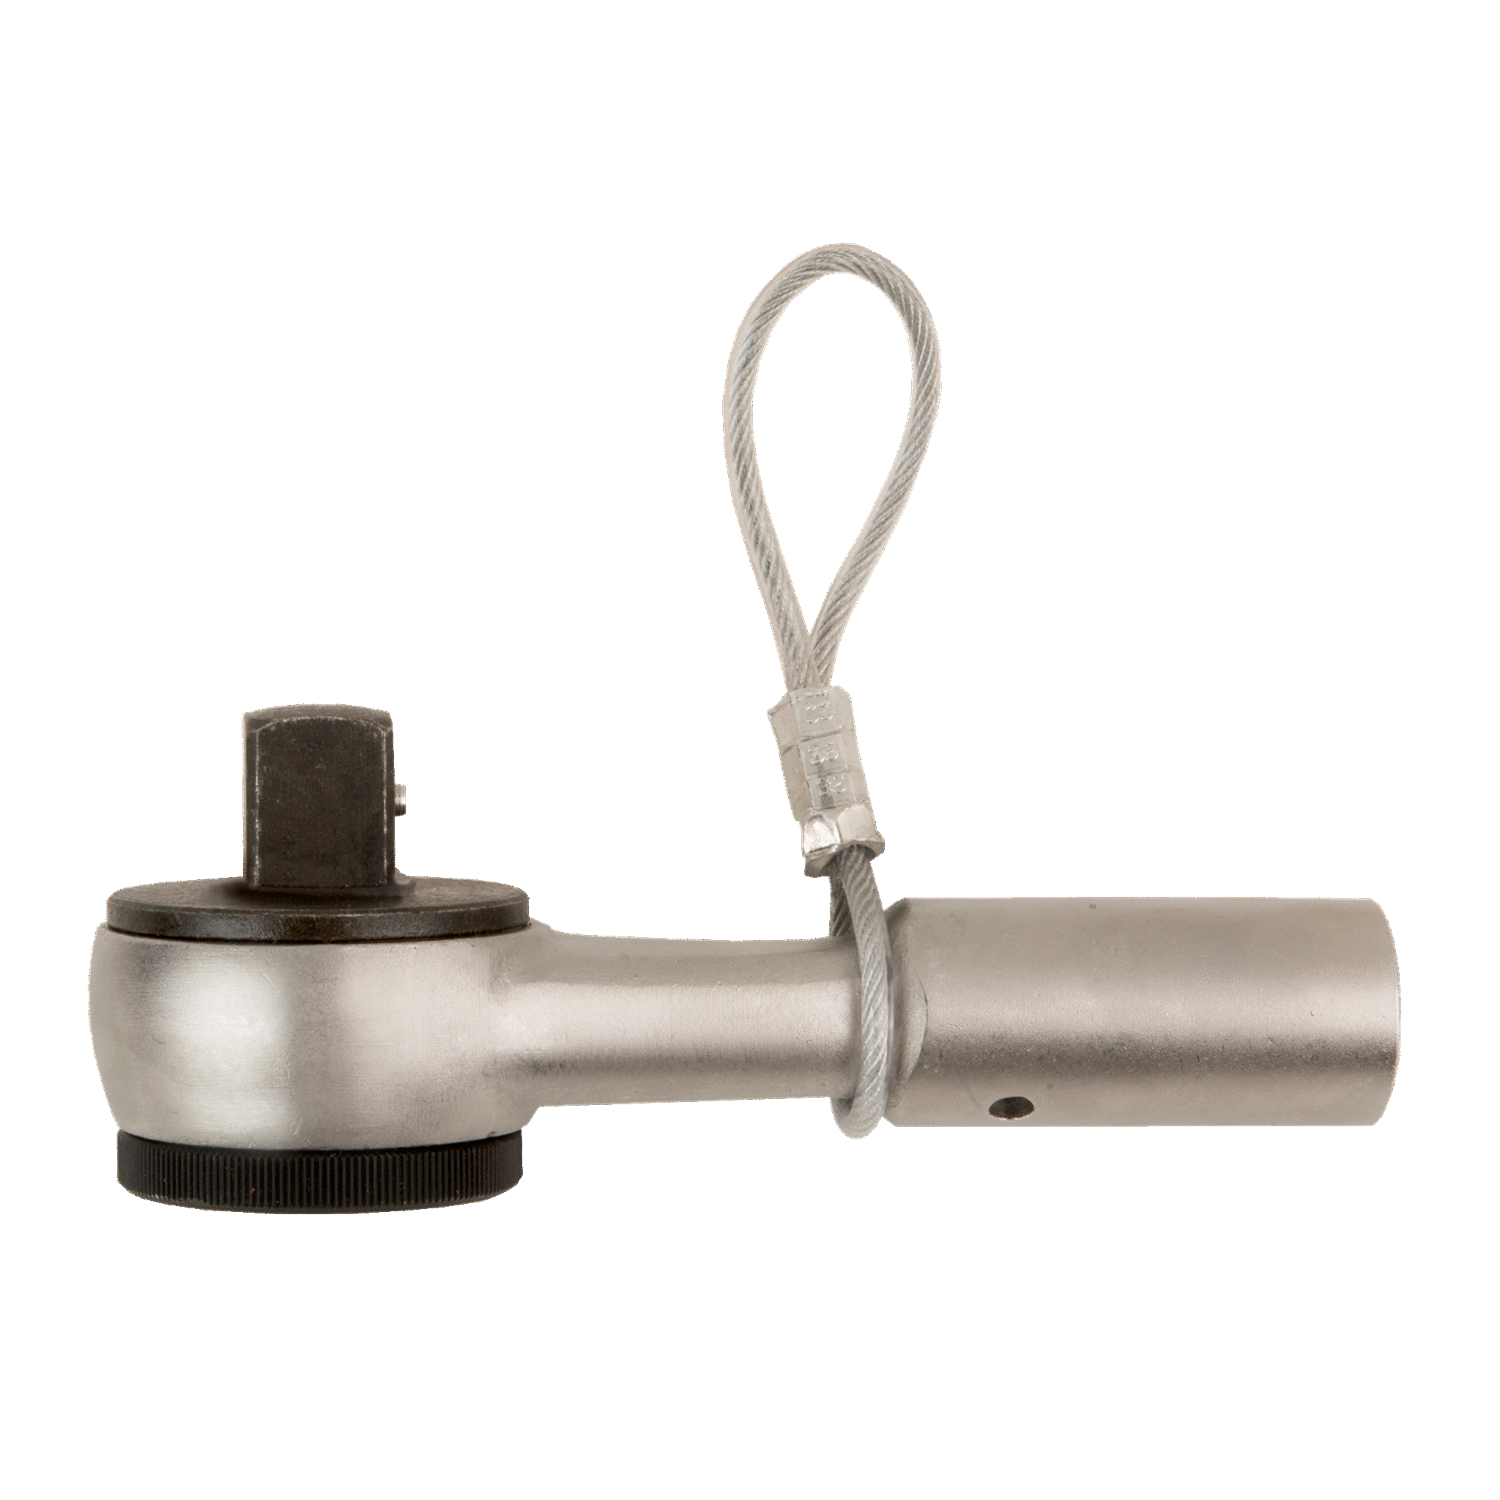 BAHCO TAH8950N/A 3/4” Square Drive Reversible Ratchet Head - Premium Reversible Ratchet Head from BAHCO - Shop now at Yew Aik.